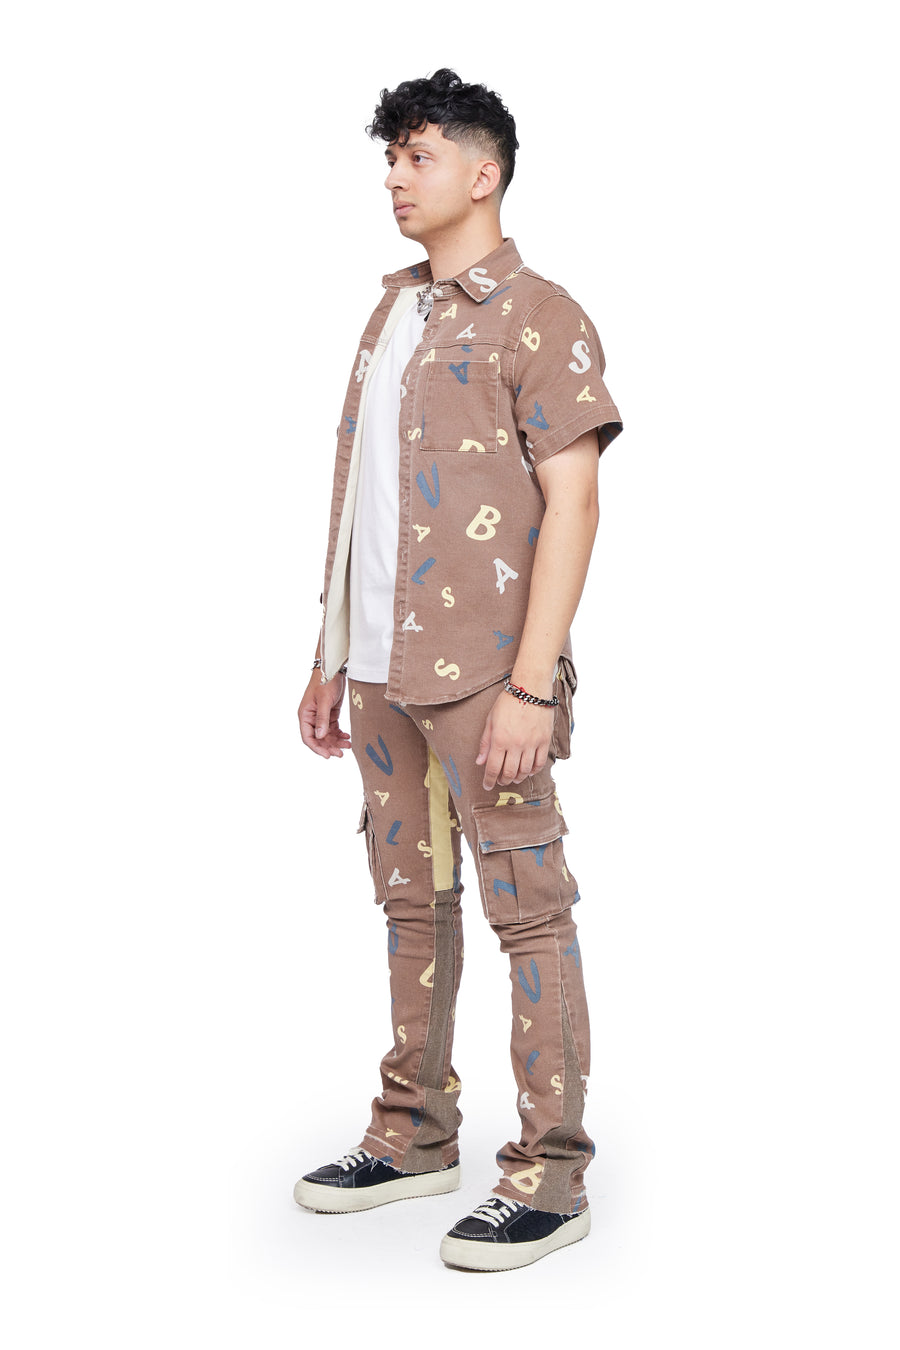 “PUZZLED” BROWN V CAMO STACKED FLARE JEAN